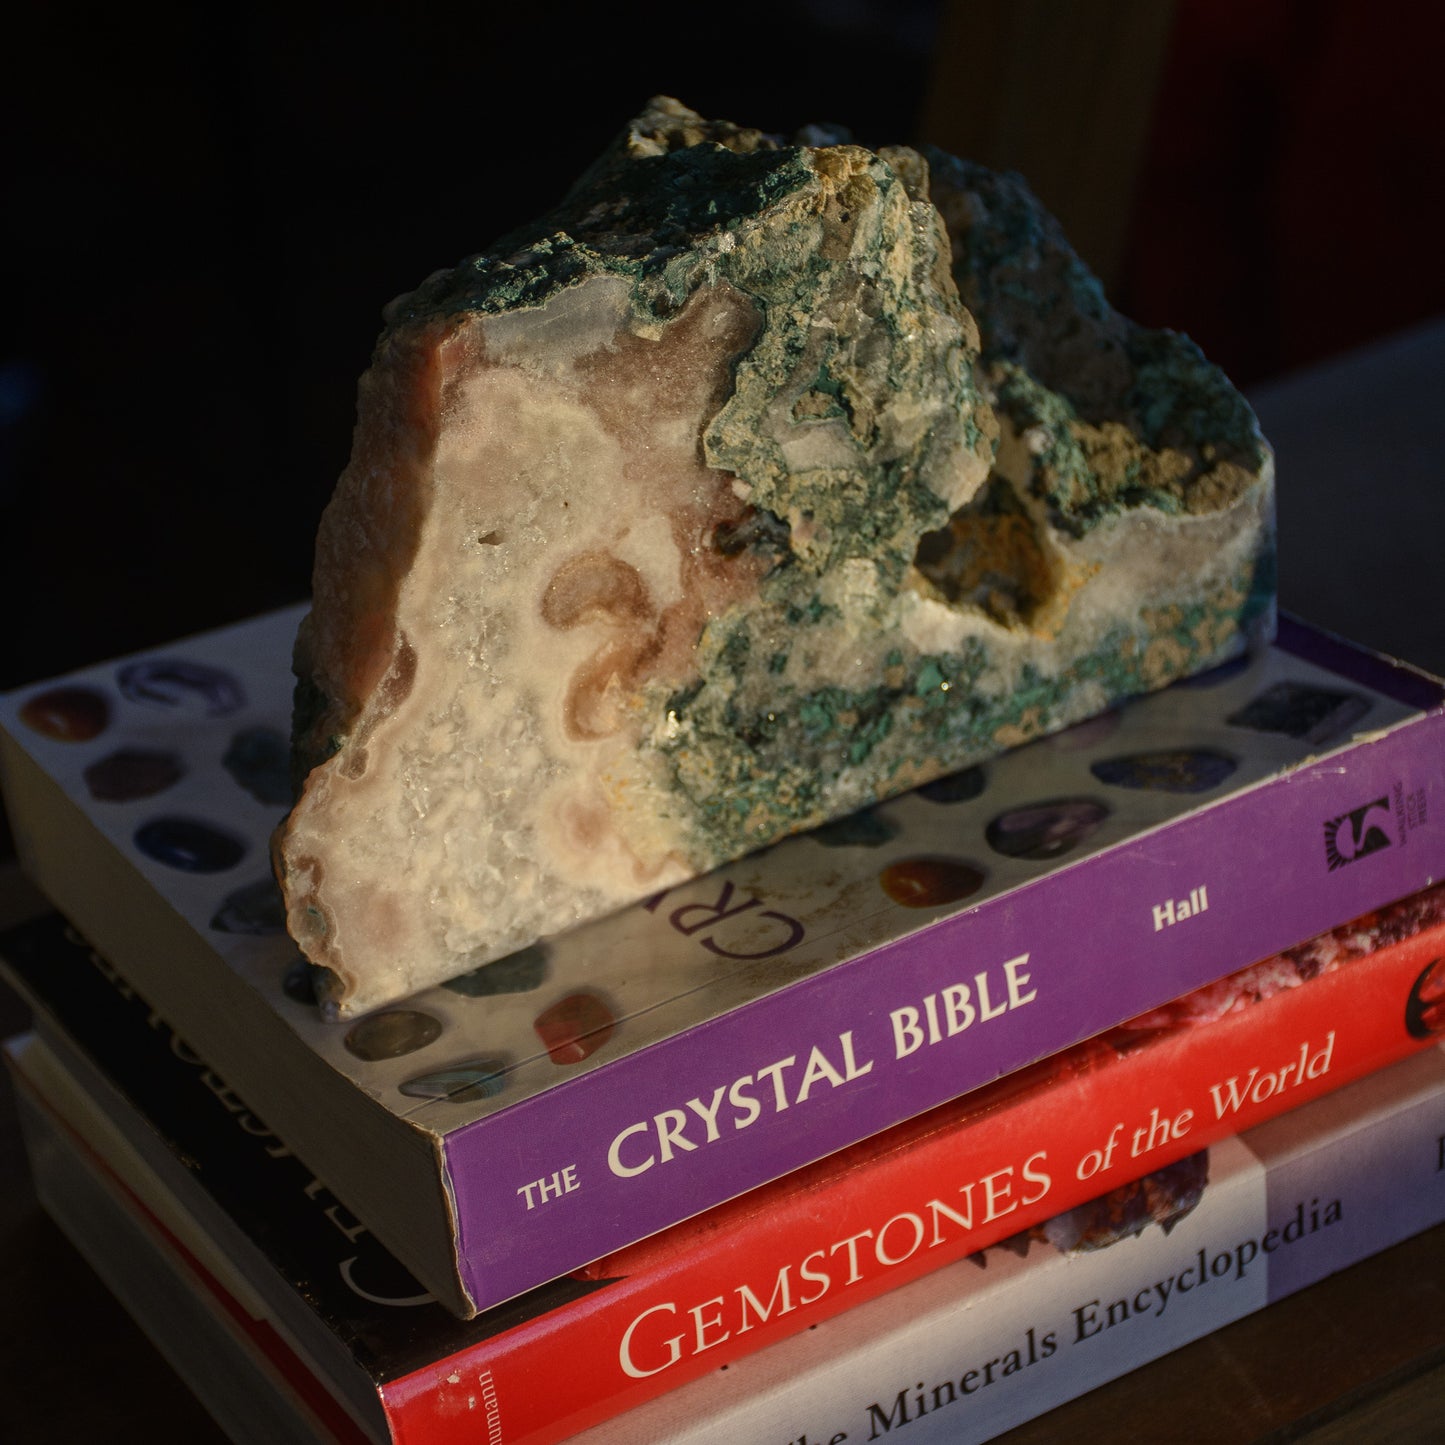 Pink Amethyst and Green Jasper Book Ends | SURRY HILLS STONES